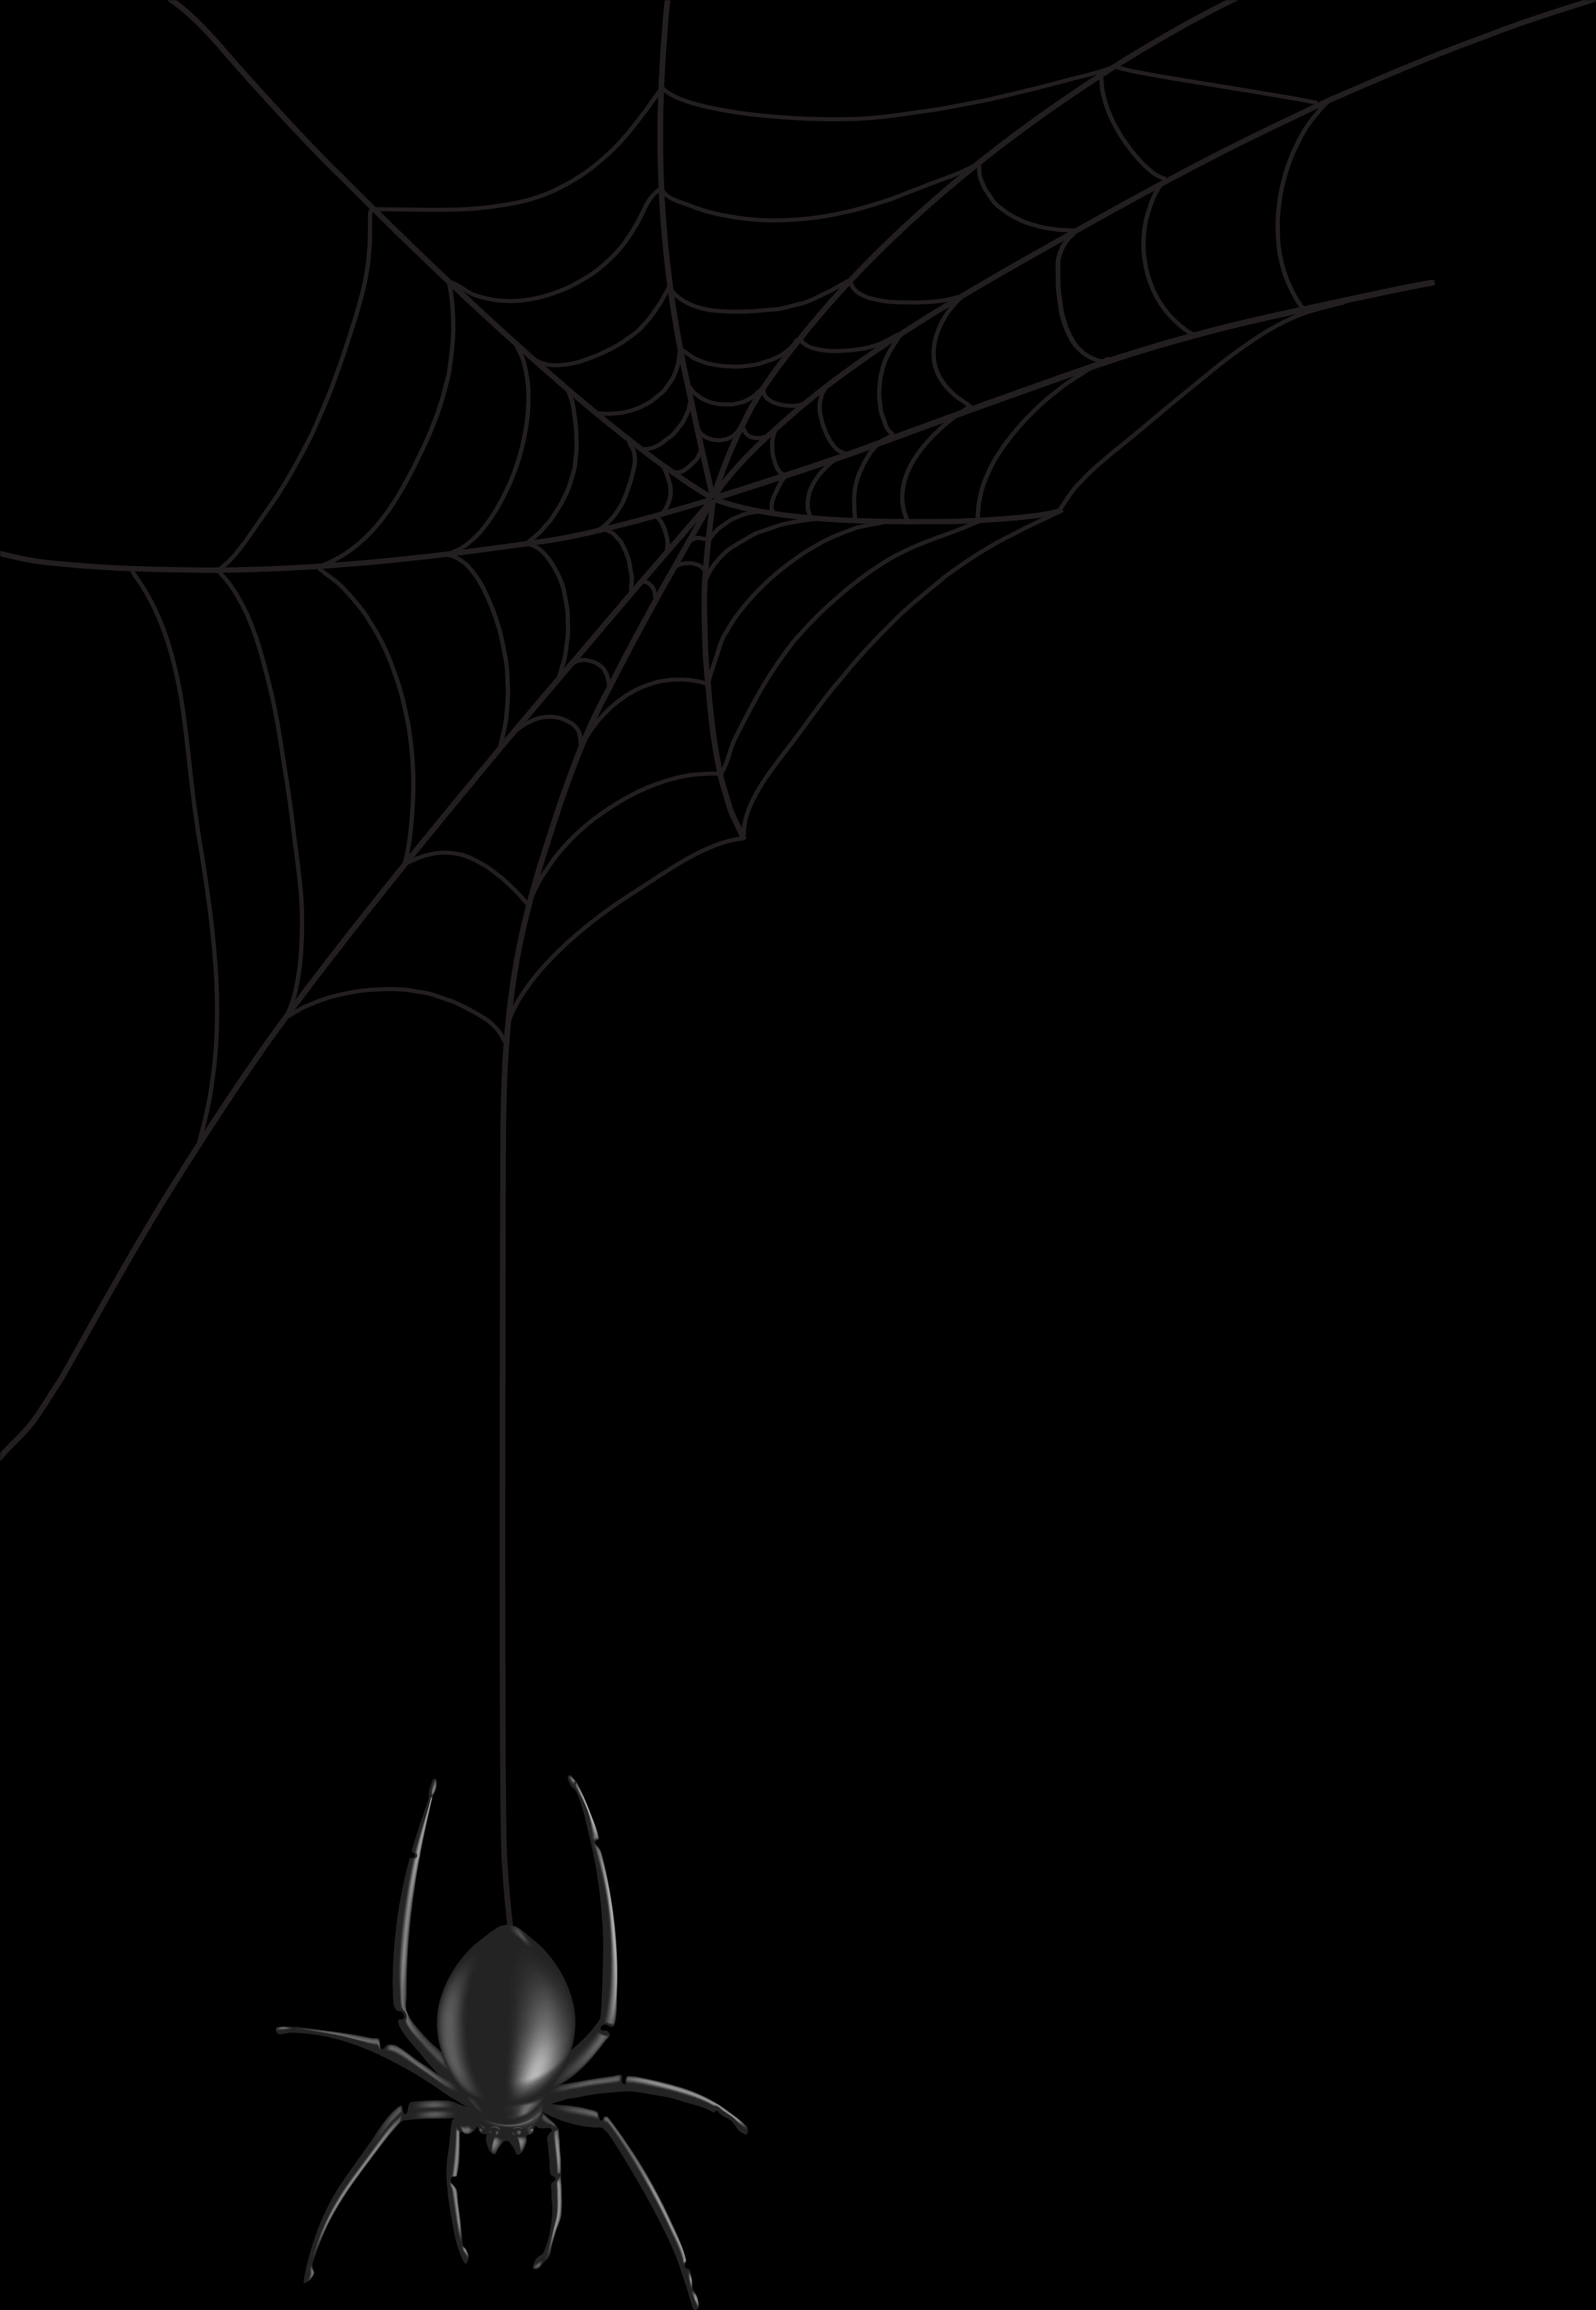 A Spider From A Web